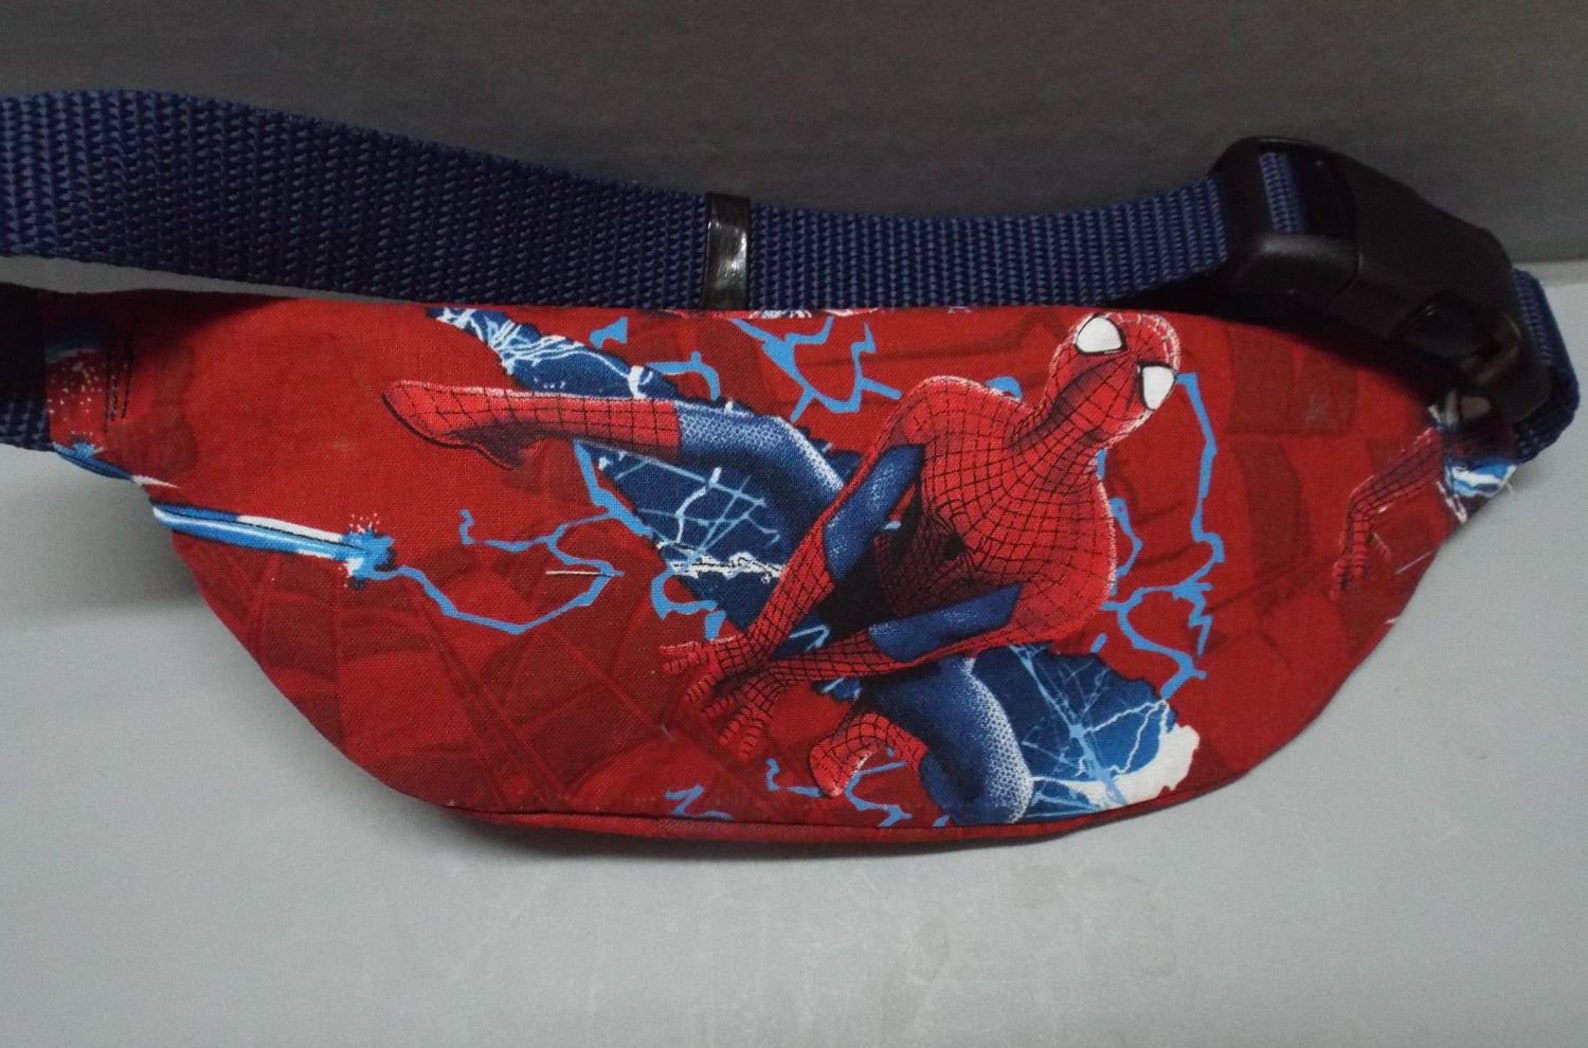 Kids Fanny Pack Belted Waist Bag 2 Spiderman Fabric Choices | Etsy